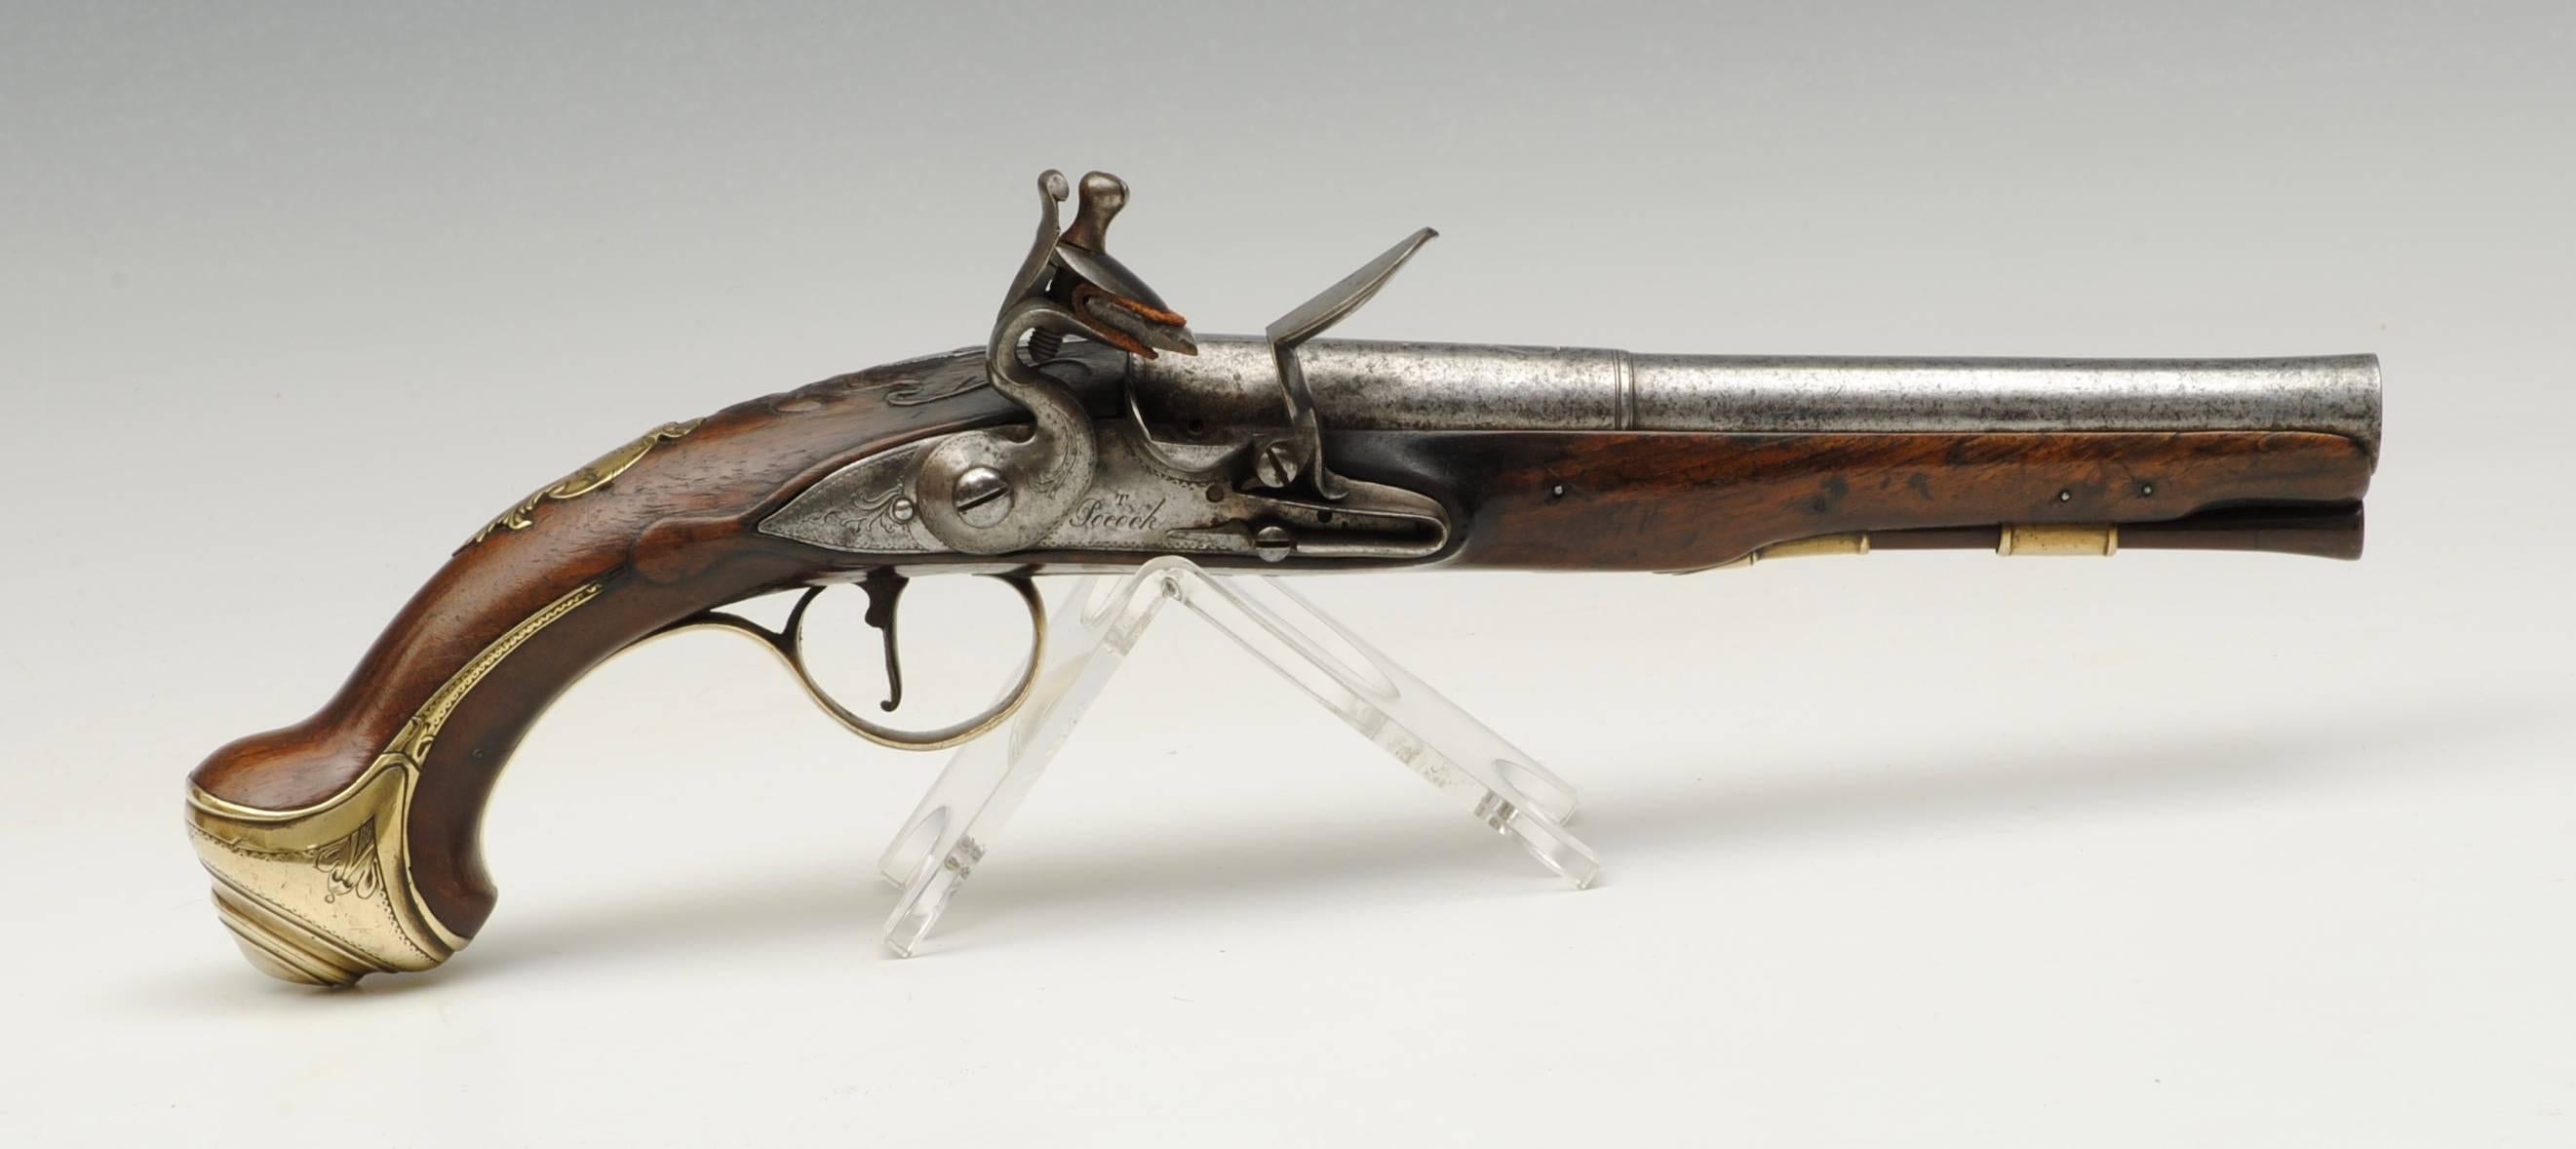 A pair of brass-mounted 22 bore gentleman's flintlock holster pistols with two stage barrels signed on the lock by T.Pocock. The walnut stocks with chased and cast brass mounts including an engraved cartouche with a stags head, Birmingham proof